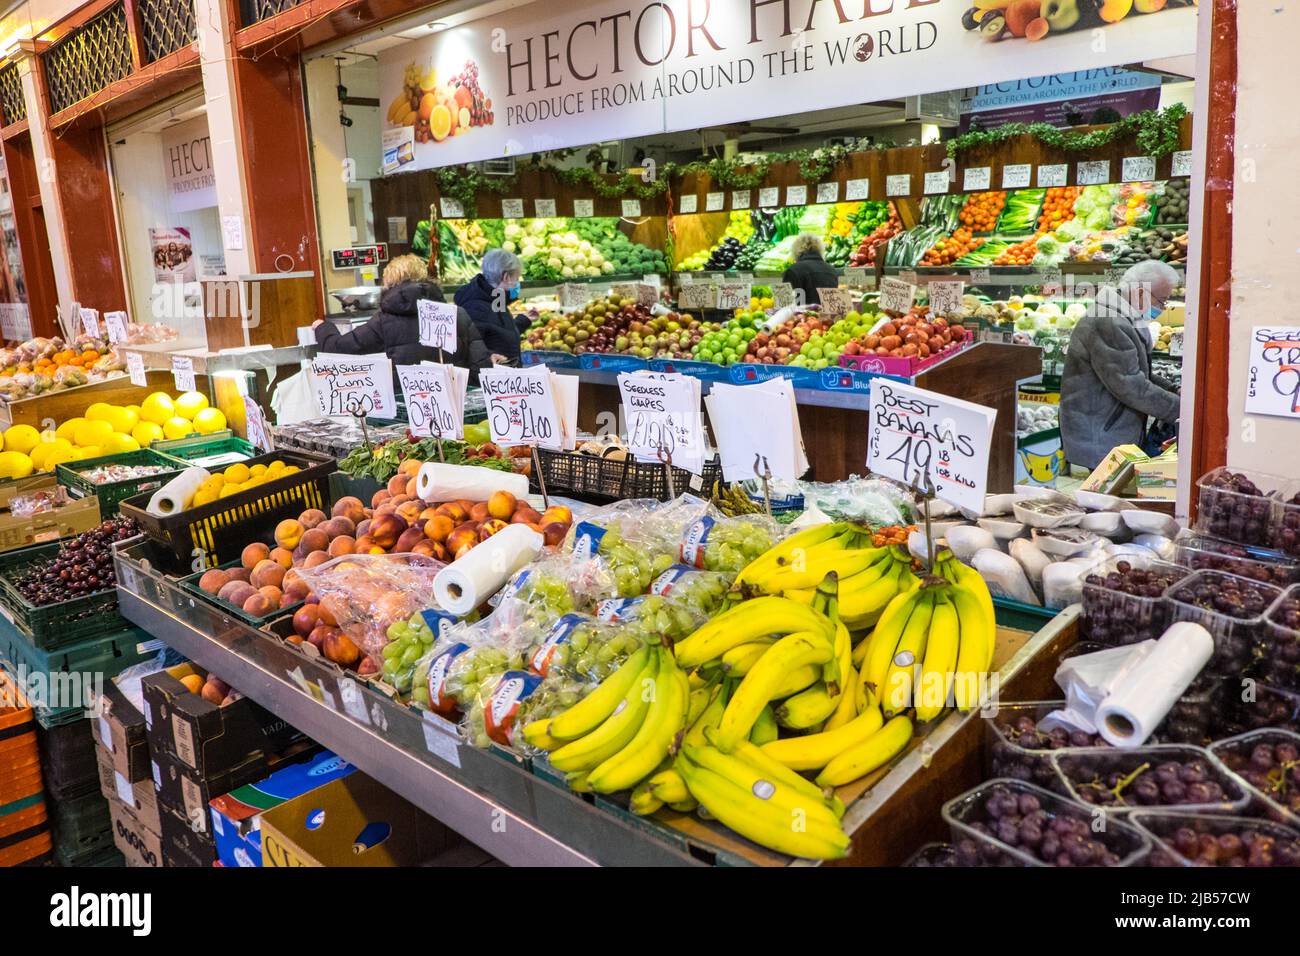 Food,produce,fruit,and,vegetables,for,sale,priced,in,pounds,lbs,prominent,Brexit,EU,Imperial,Imperial measures,Imperial weight,Imperial measurement,Imperial unit,weight,weights,weights and measures,not,or,secondary,kilograms,kilogrammes,kilos,at, Grainger Market,centre,central,Newcastle,North East,England,UK,United Kingdom,GB,Great Britain,English,British,Europe, Stock Photo